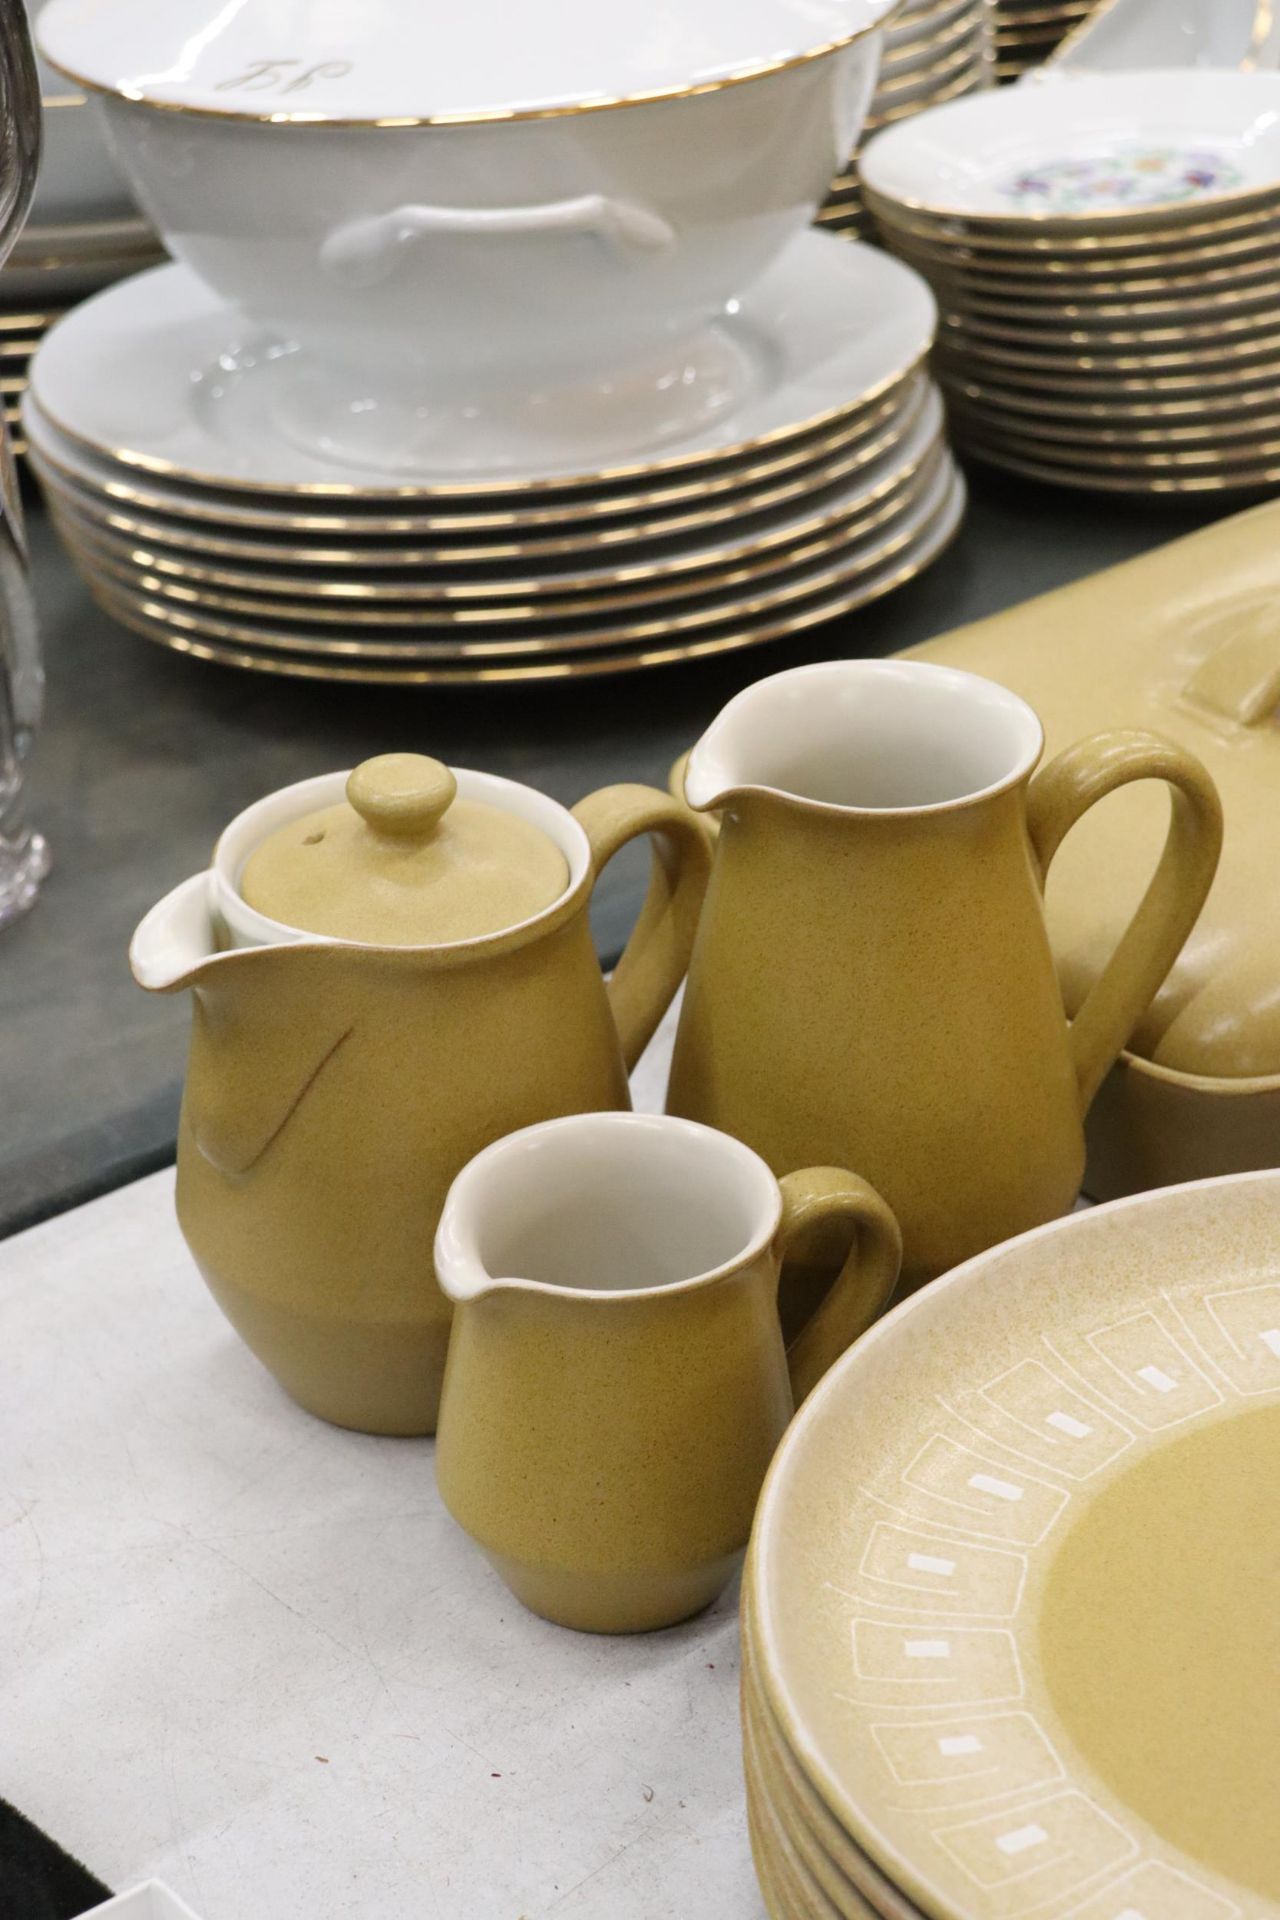 A DENBY MUSTARD COLOURED DINNER SERVICE, TO INCLUDE VARIOUS SIZES OF PLATES, A CASSEROLE DISH, - Image 9 of 9